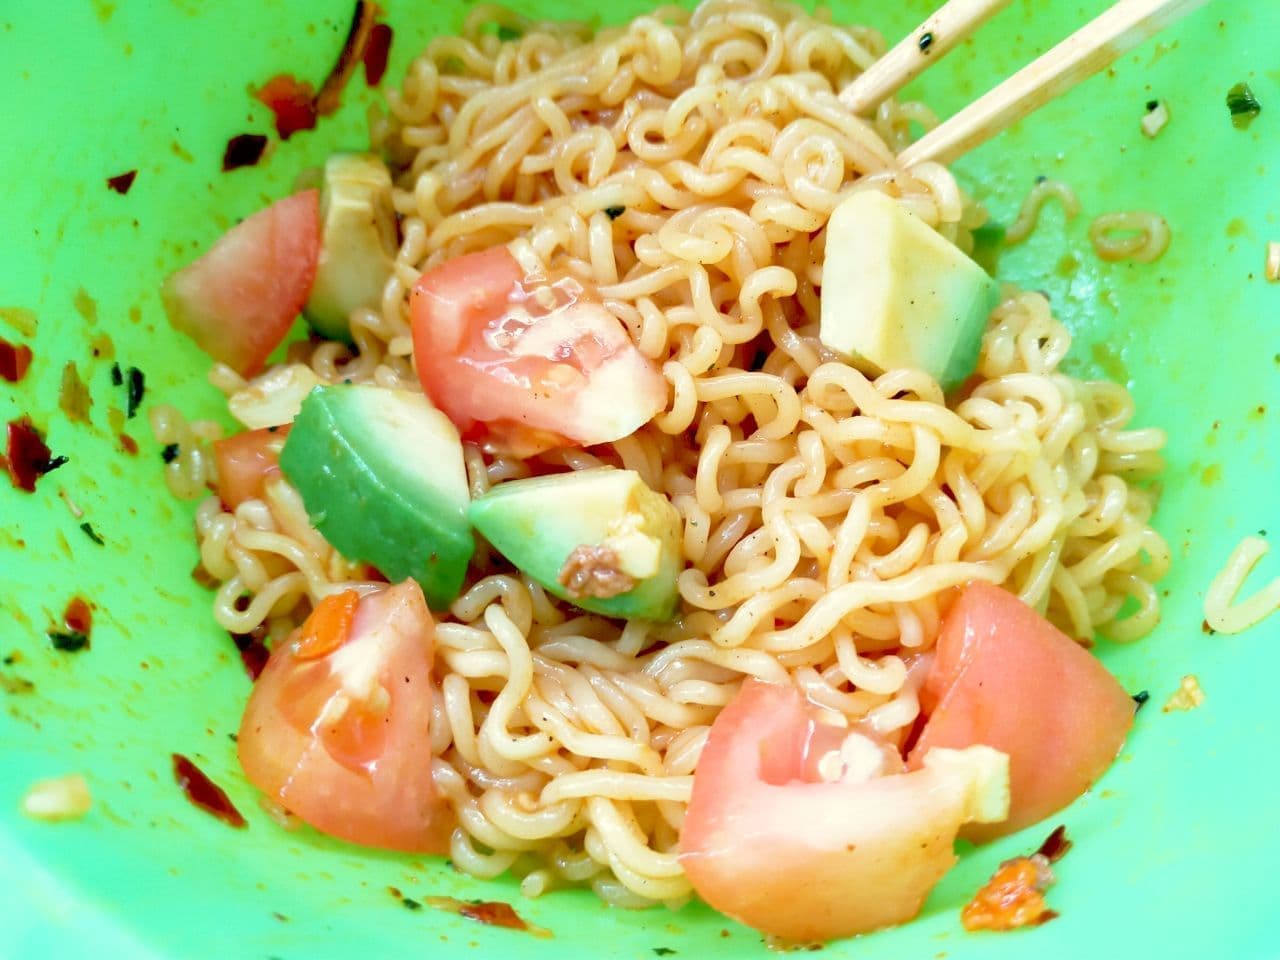 "Chilled spicy ramen without juice" recipe